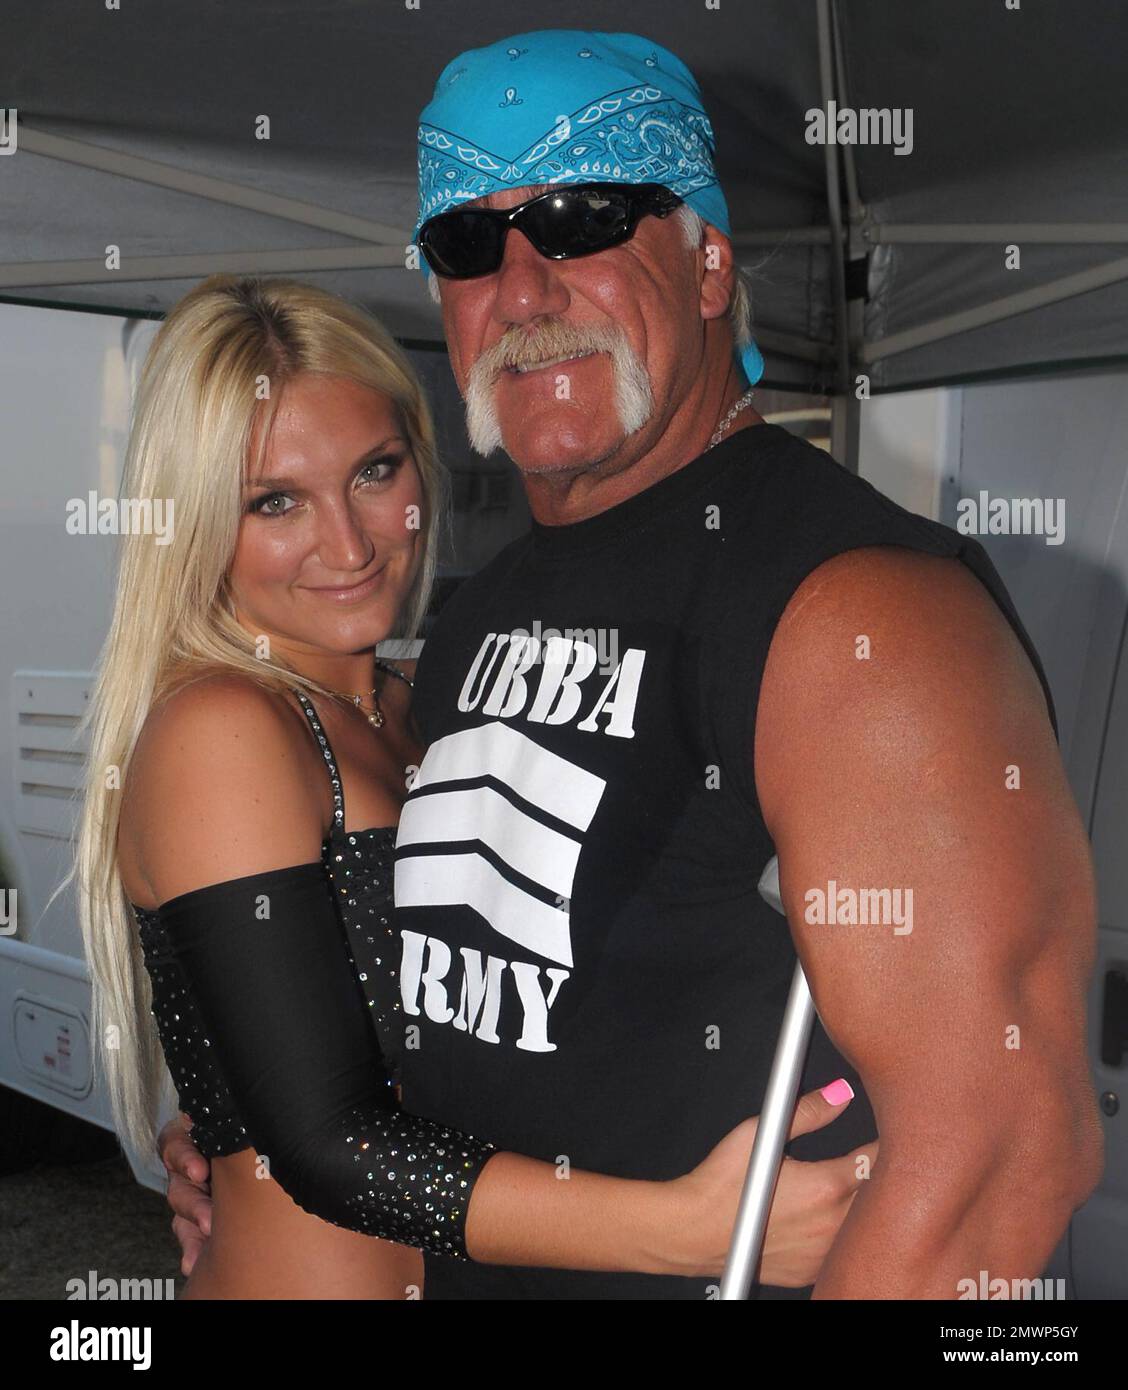 Miami, United States Of America. 15th Mar, 2009. MIAMI - FL - MARCH 15; Hulk Hogan (AKA Terry Gene Bollea) backstage after Brooke Hogans performace at the Calle Ocho carnival. The Hulk was seen with on crutches after he was injured at the court house fighting with his x wifes lawyer. the hulk also had only one crutch after the other was was stolen from him at the airport. On March 15, 2009 in Miami Florida People: Brooke Hogan, Hulk Hogan Transmission Ref: FLXX Must call if interested Michael Storms Credit: Storms Media Group/Alamy Live News Stock Photo